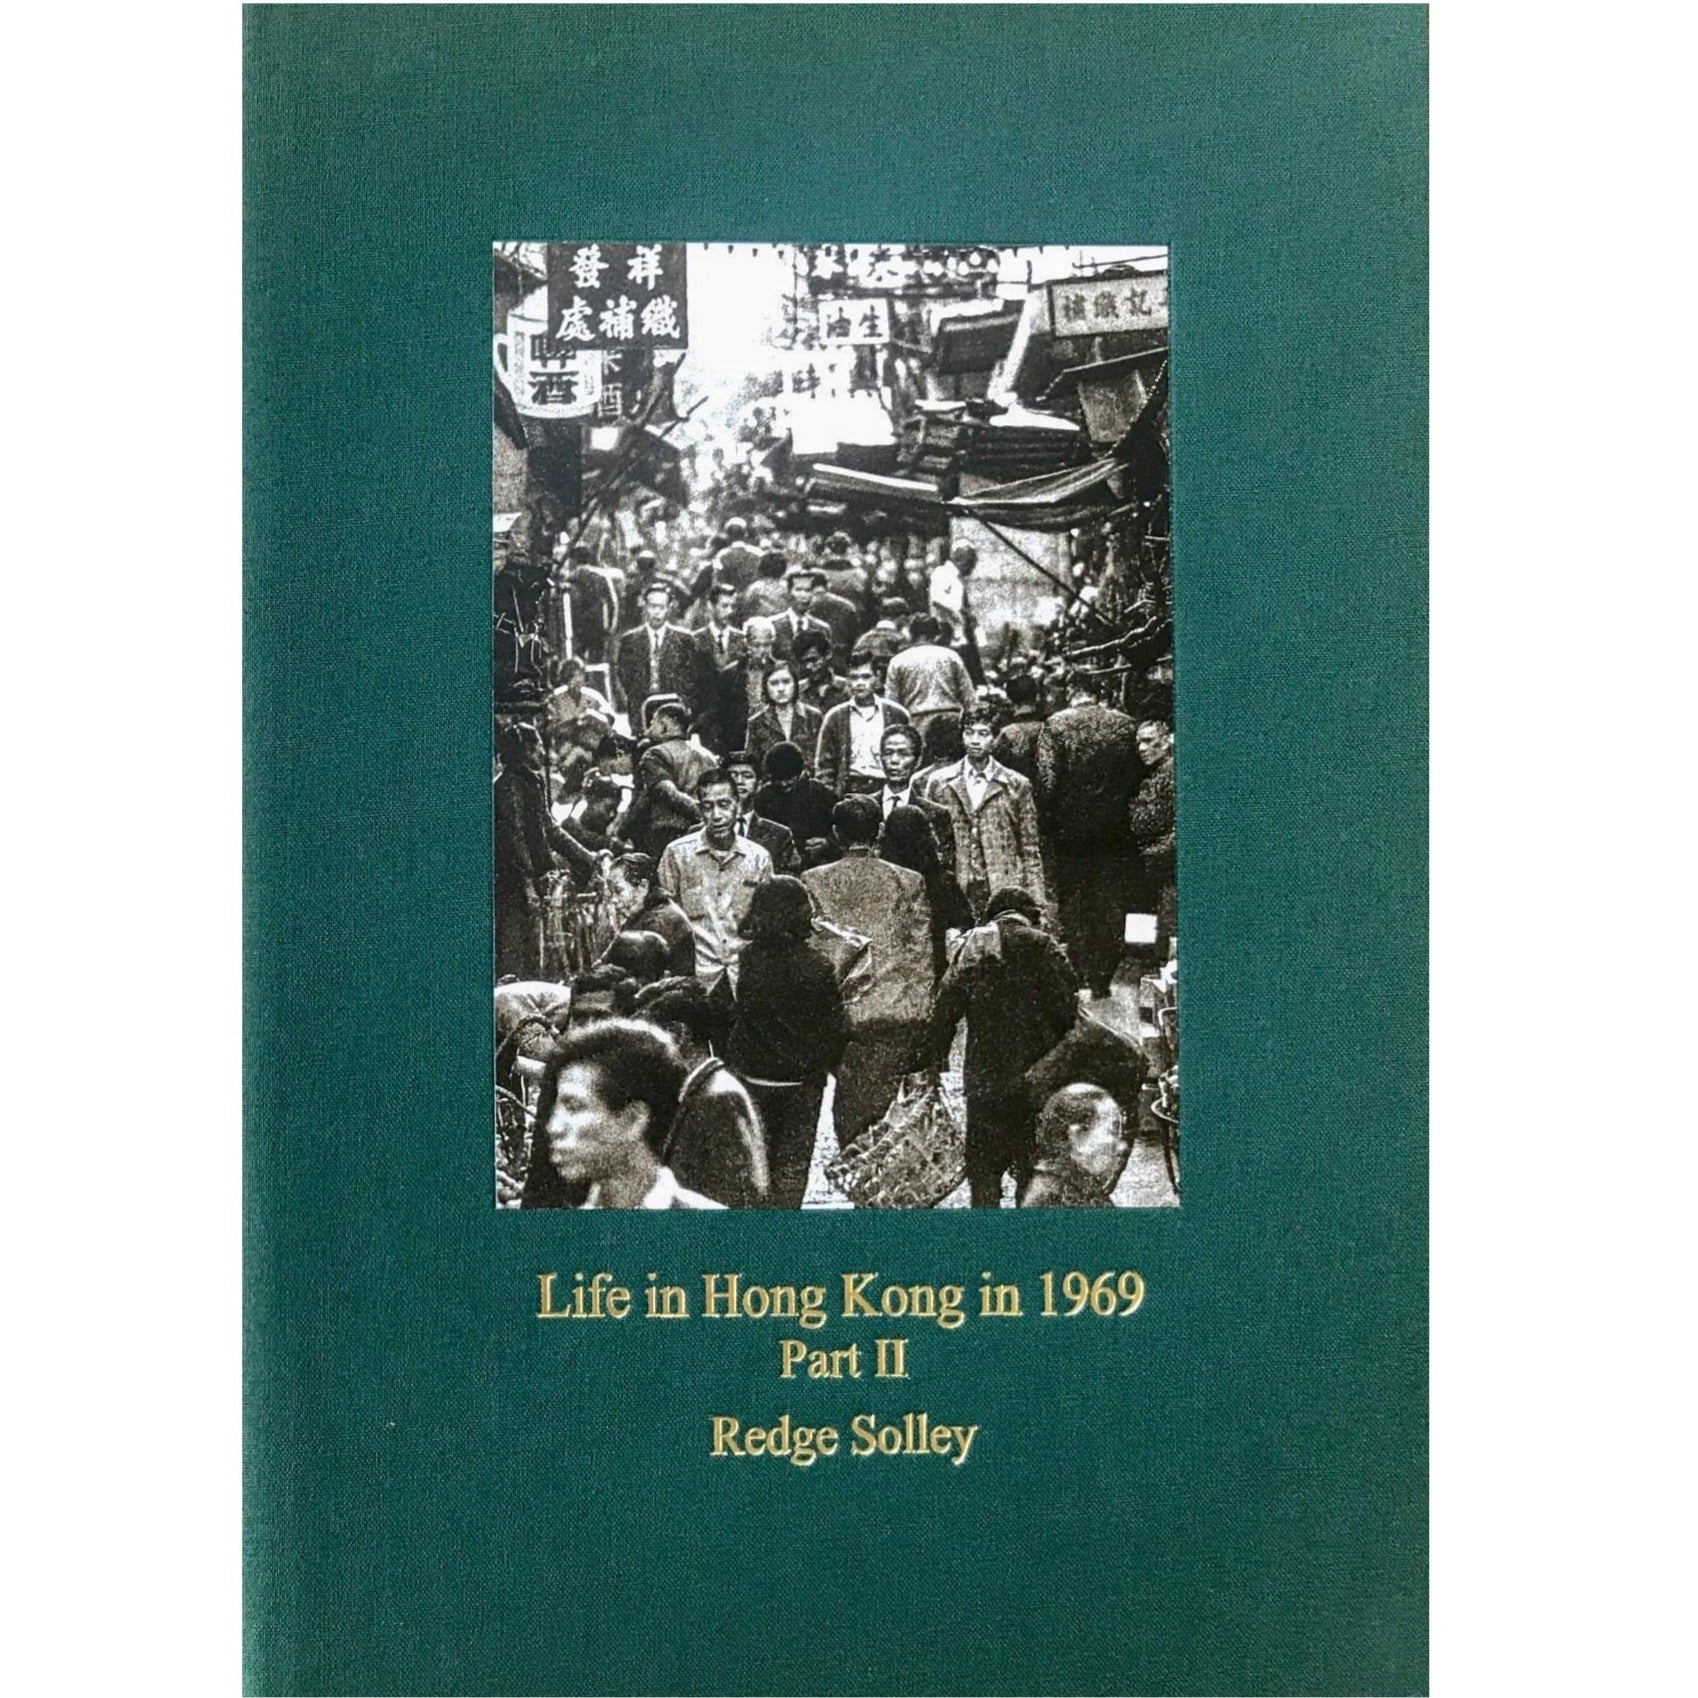 Life in Hong Kong in 1969 Part II Limited Edition Photo Book by Redge Solley